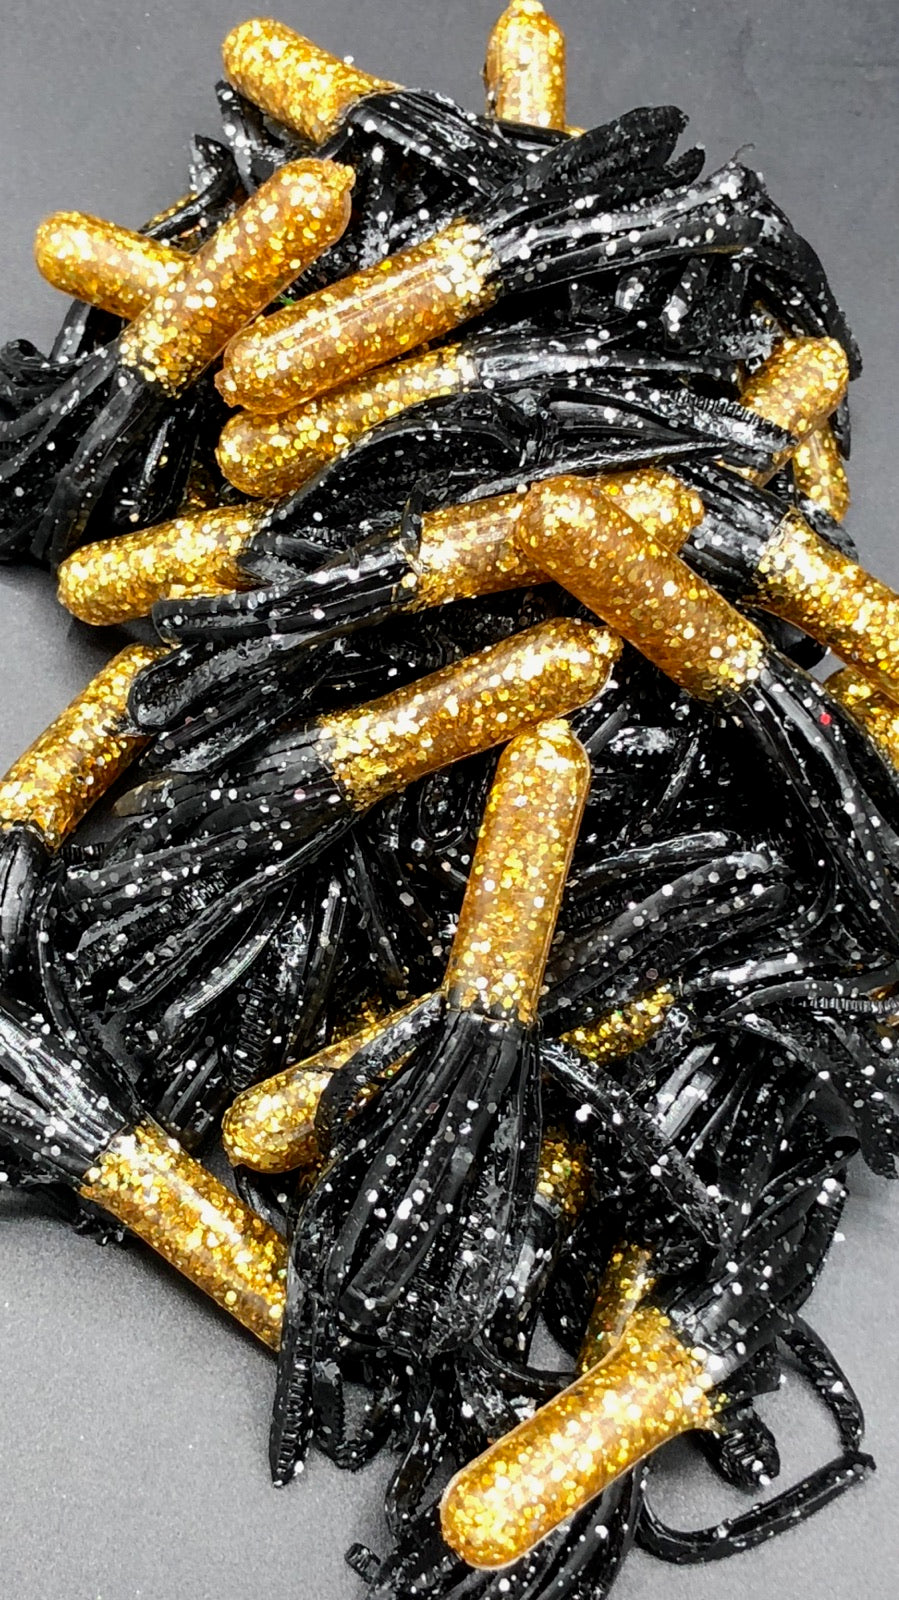 Tuff Bugs Midnight Gold with Silver Flake - 10/pkg - 2 1/2 inch solid body soft rubber bait